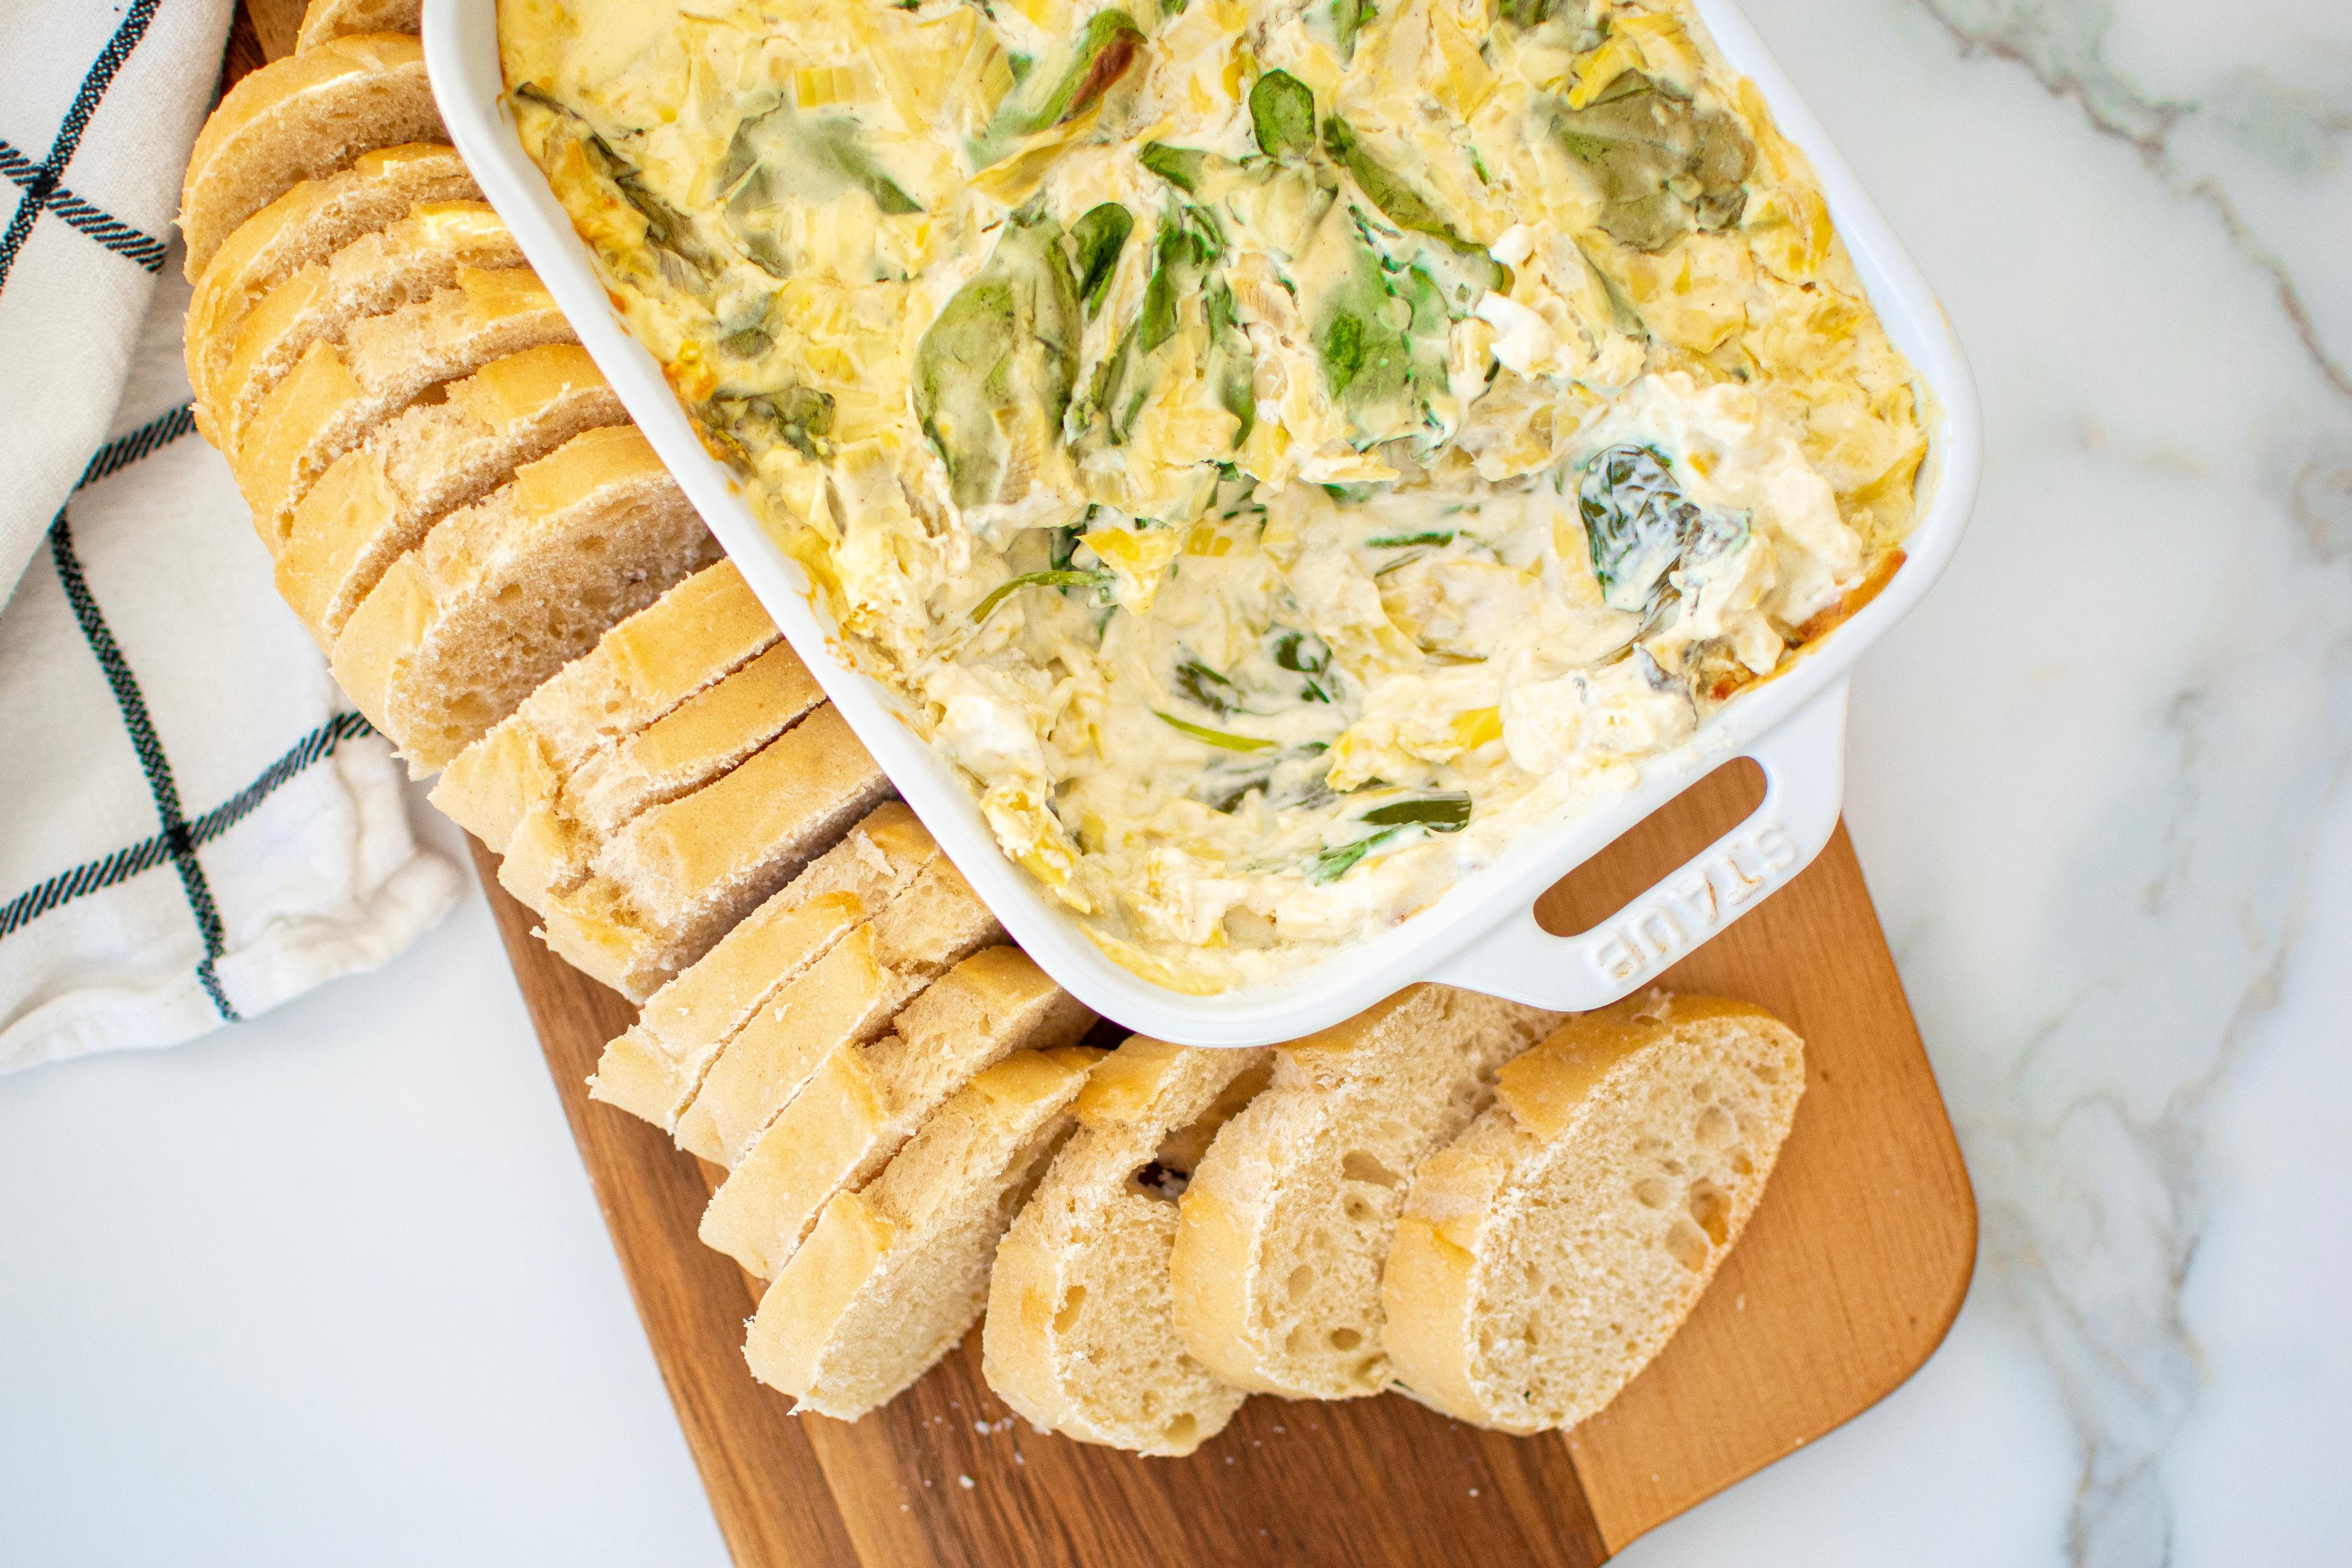 Spinach Artichoke Dip on a cutting board with bread.